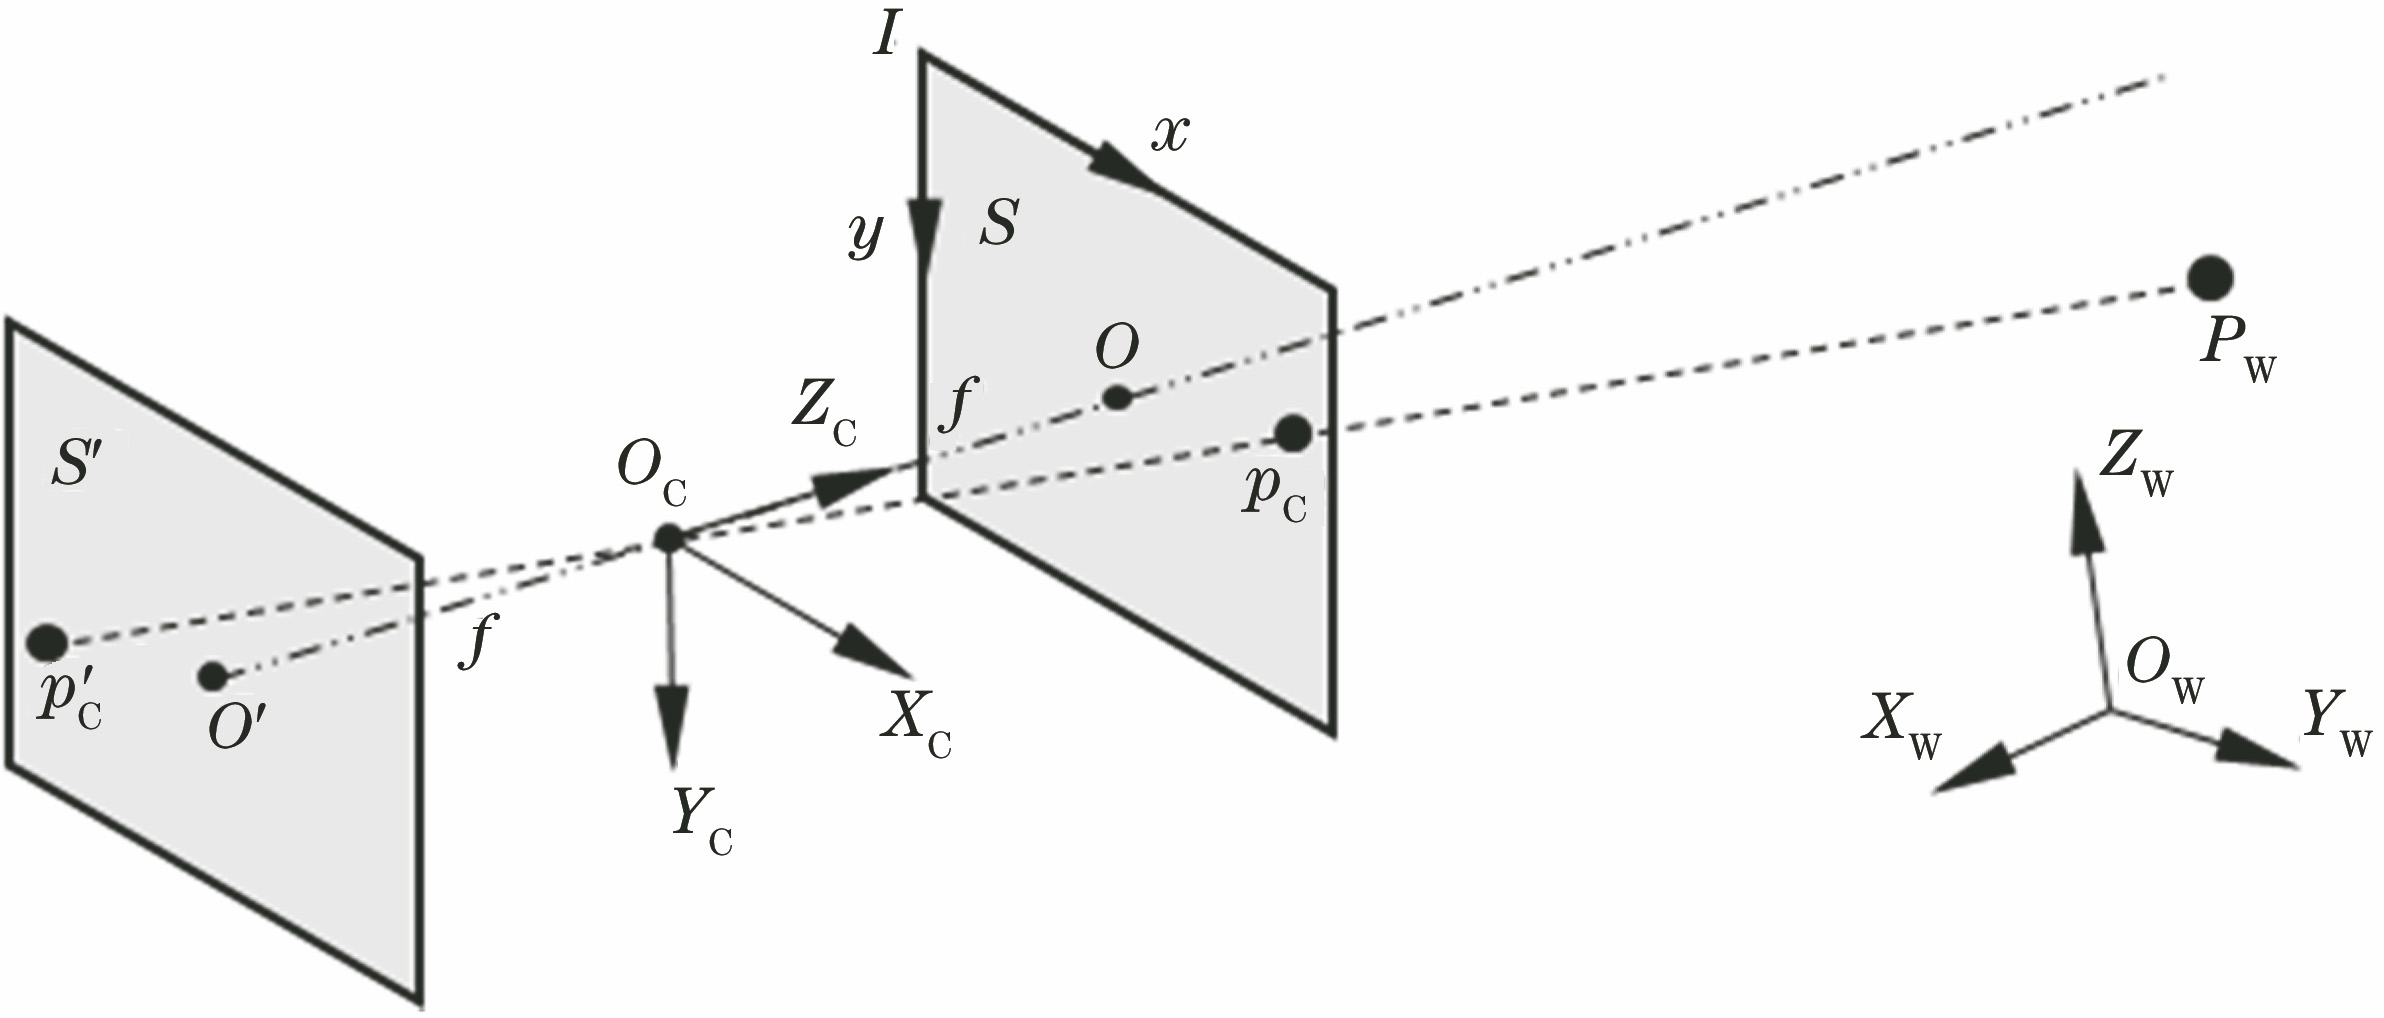 Imaging model of central perspective projection